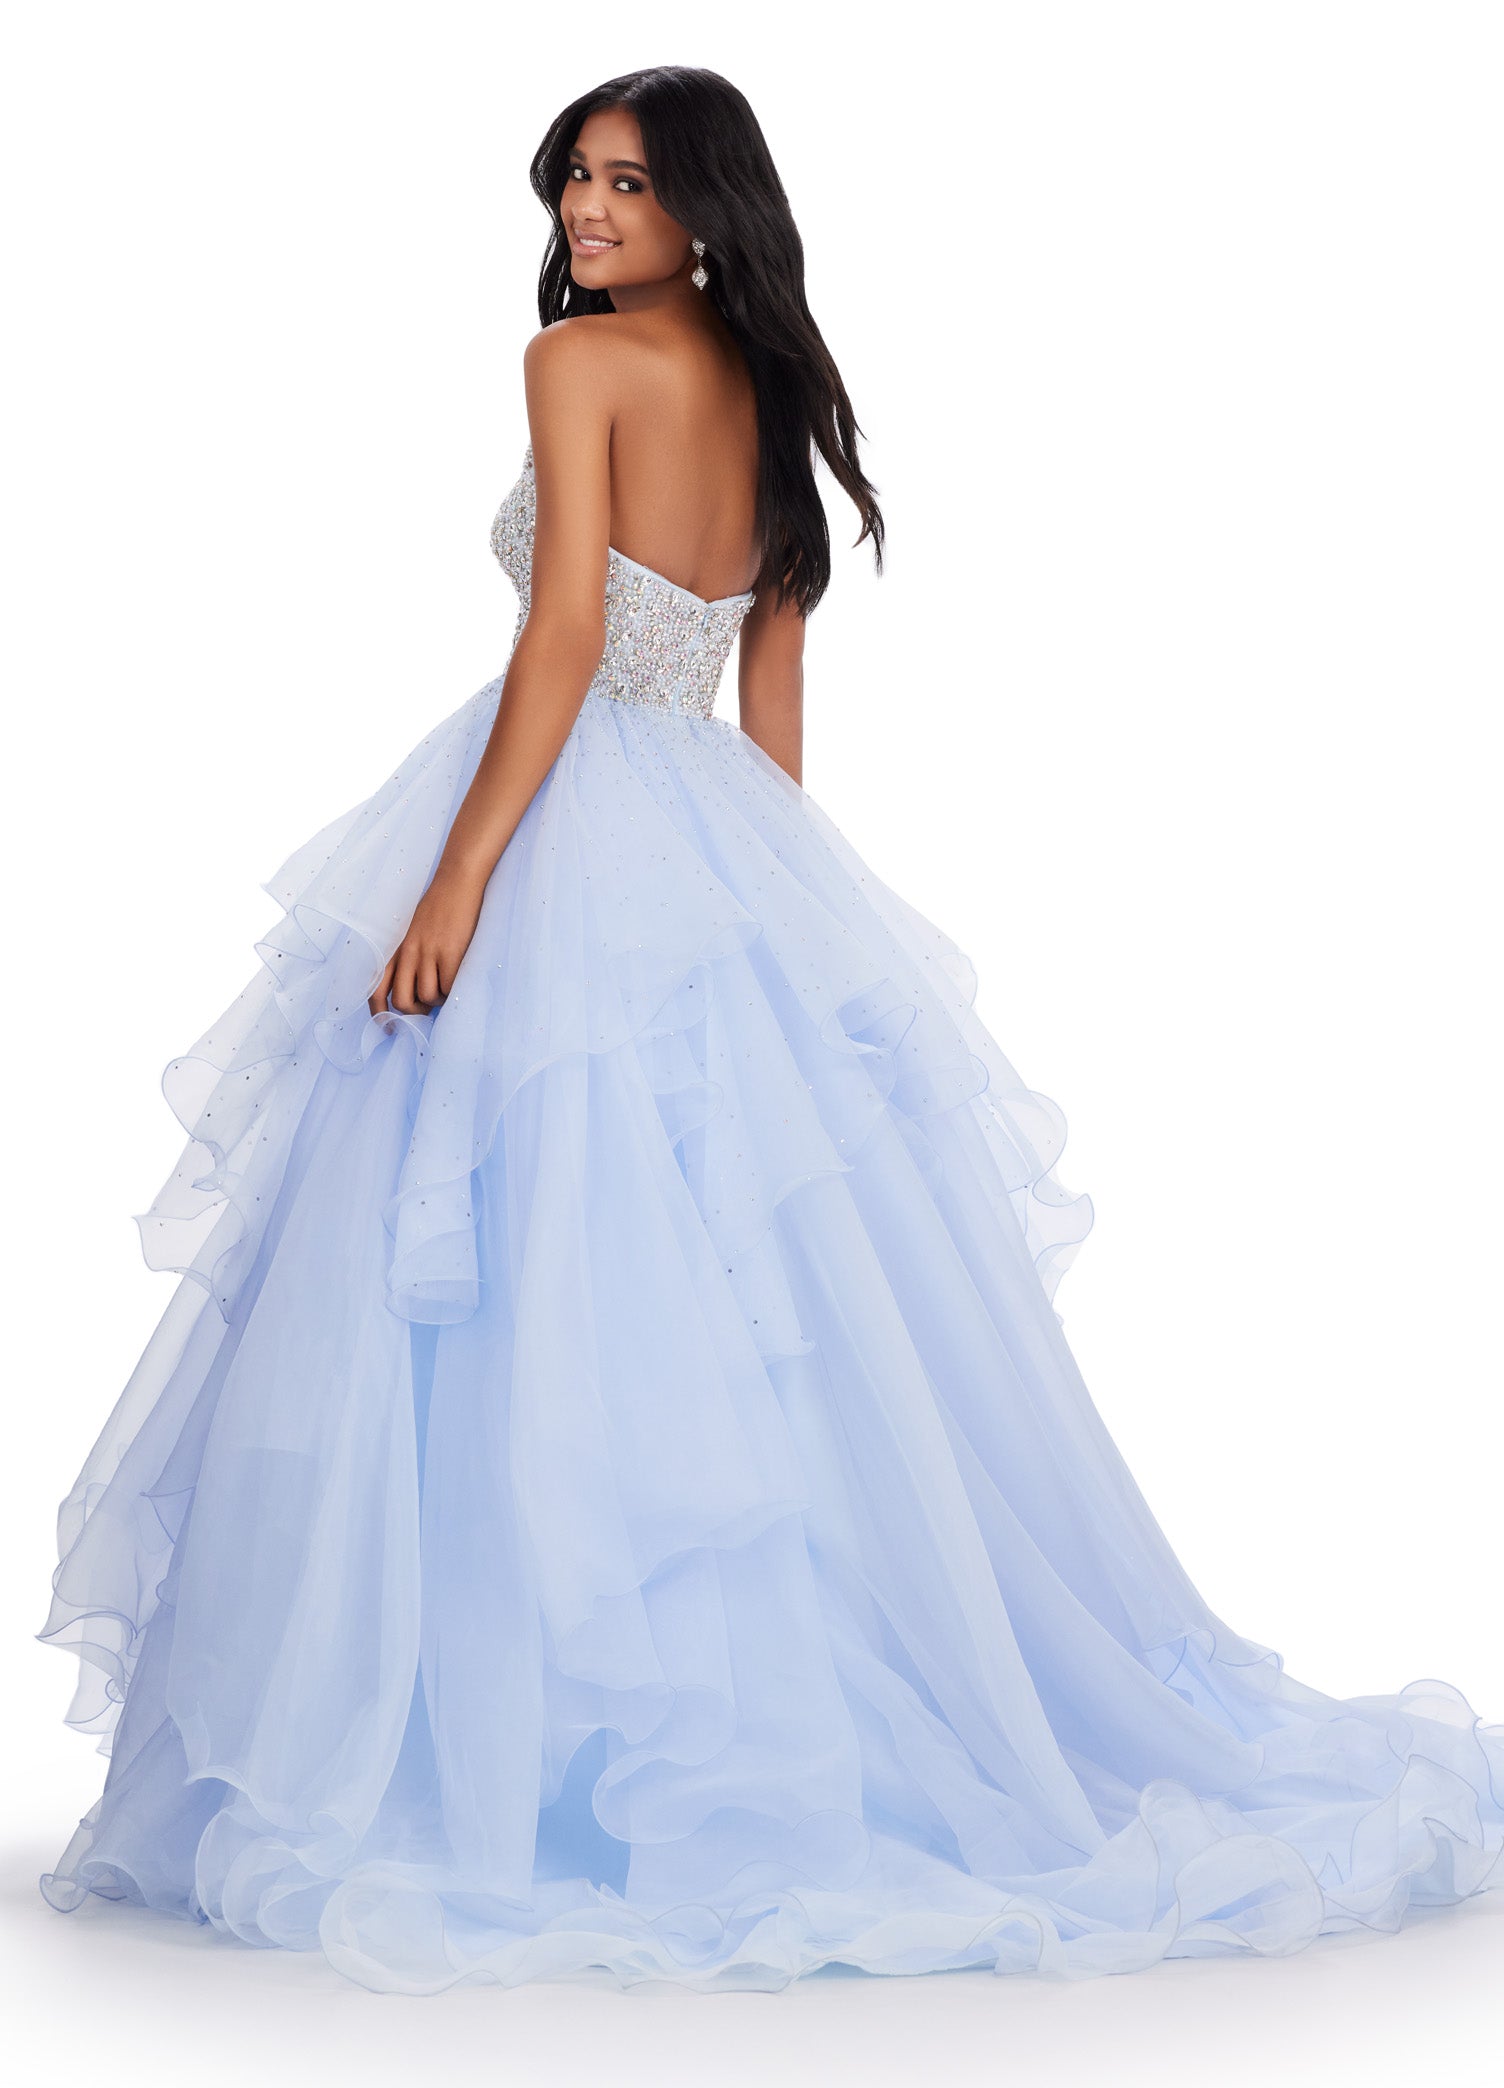 Expertly crafted and designed for a show-stopping appearance, the Ashley Lauren 11545 Long Prom Dress is sure to make you stand out at any formal event. With a strapless organza ball gown silhouette and a beaded bustier, this gown exudes elegance and glamour. Perfect for pageants or prom, this dress will make you feel confident and beautiful. The dreamiest dress! This strapless organza ball gown features a fully beaded bustier and ruffled organza skirt. 